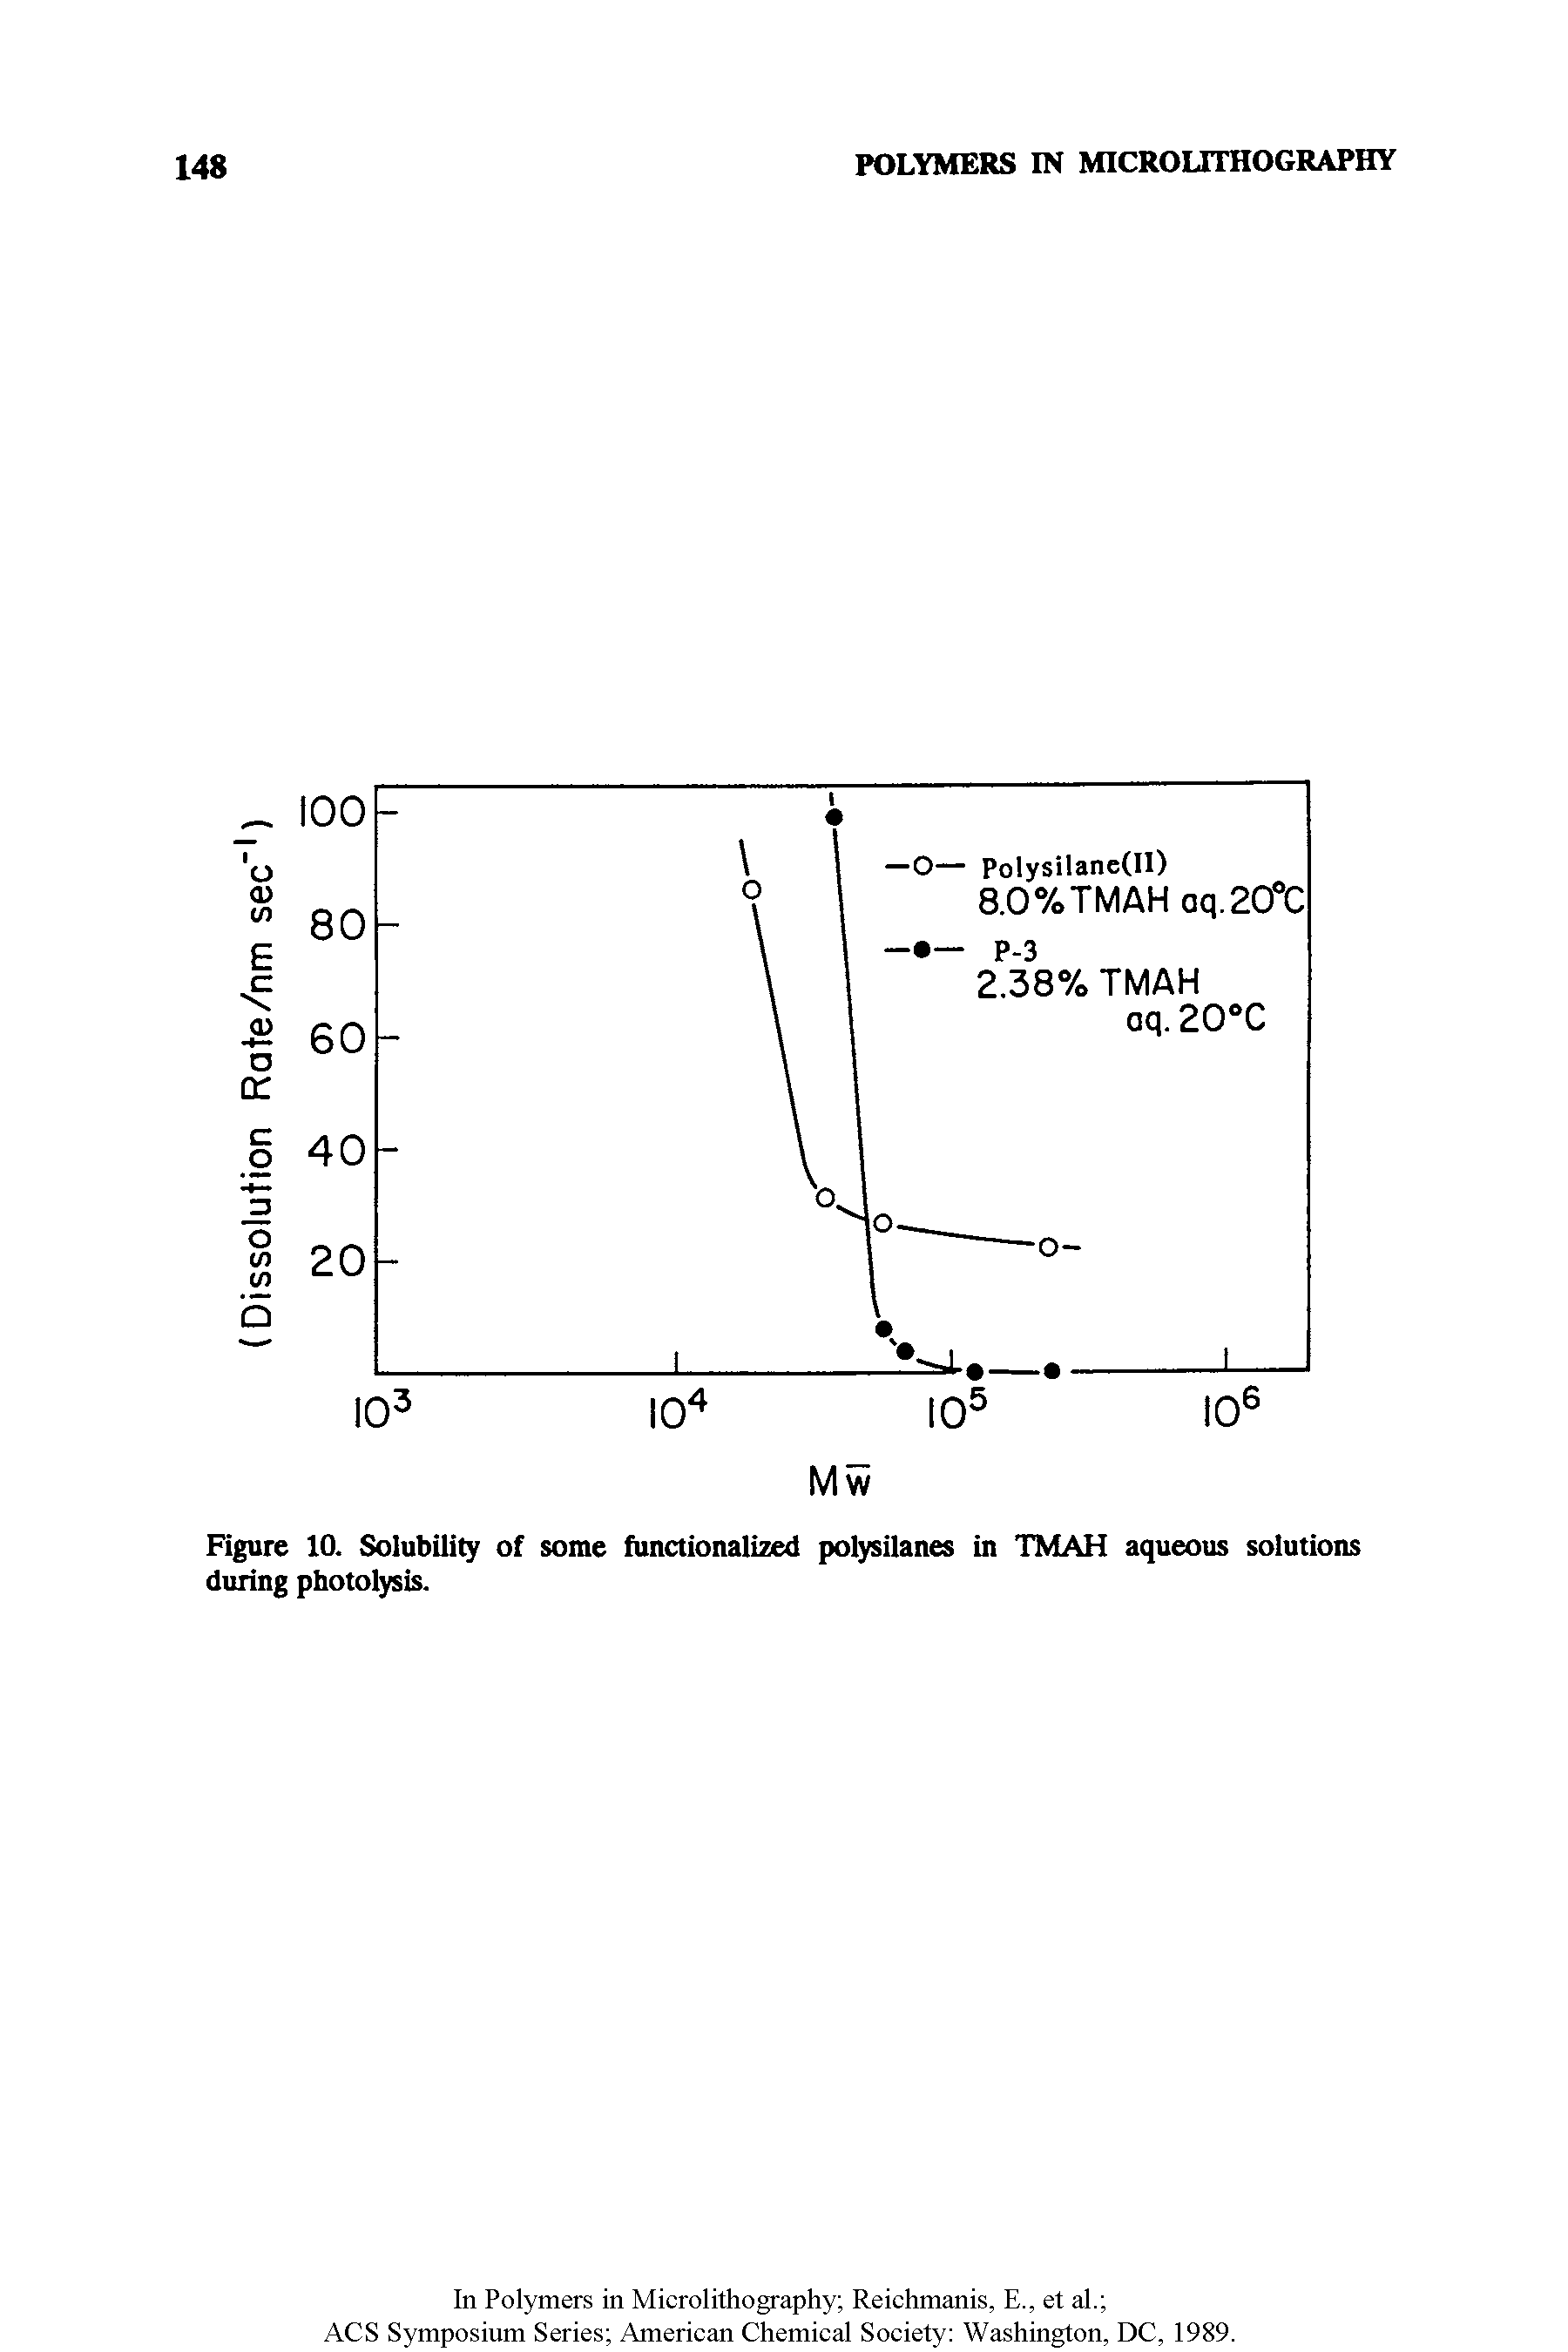 Figure 10. Solubility of some functionalized polysilanes in TMAH aqueous solutions during photolysis.